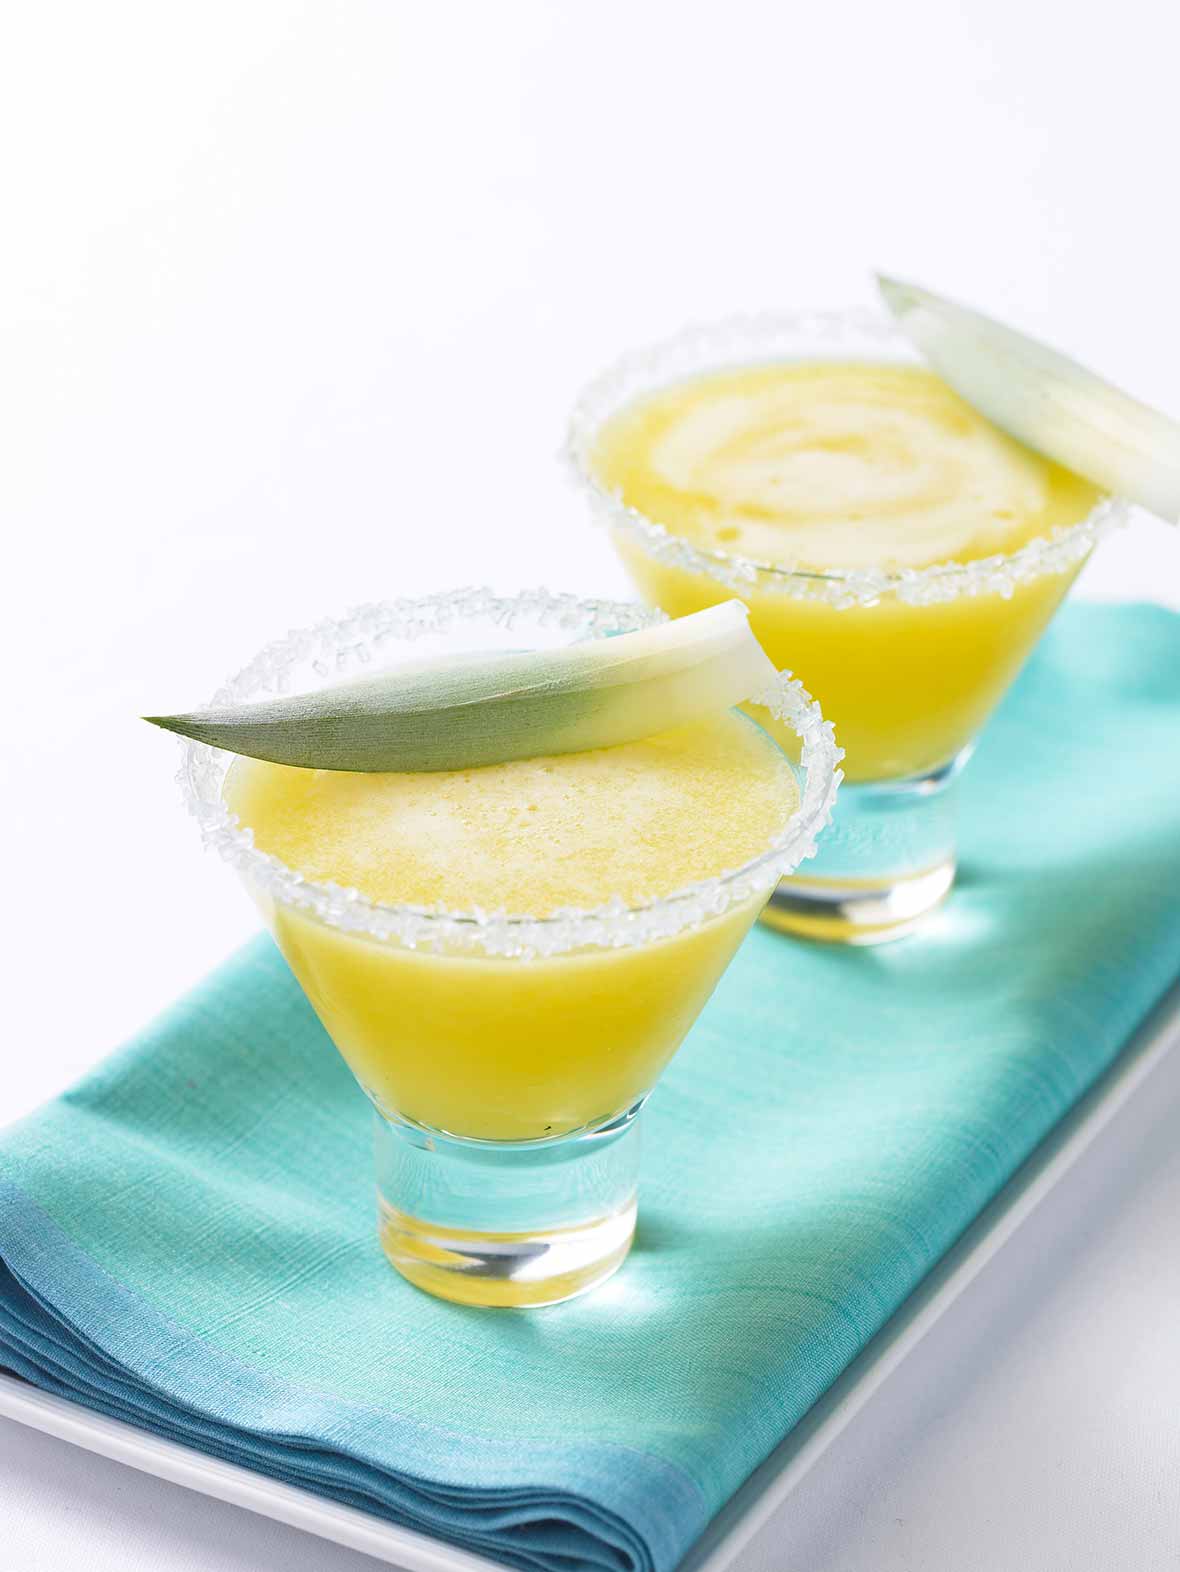 Two glasses filled with pineapple-tequila smoothie, rimmed with sugar, topped with line wedges on a napkin